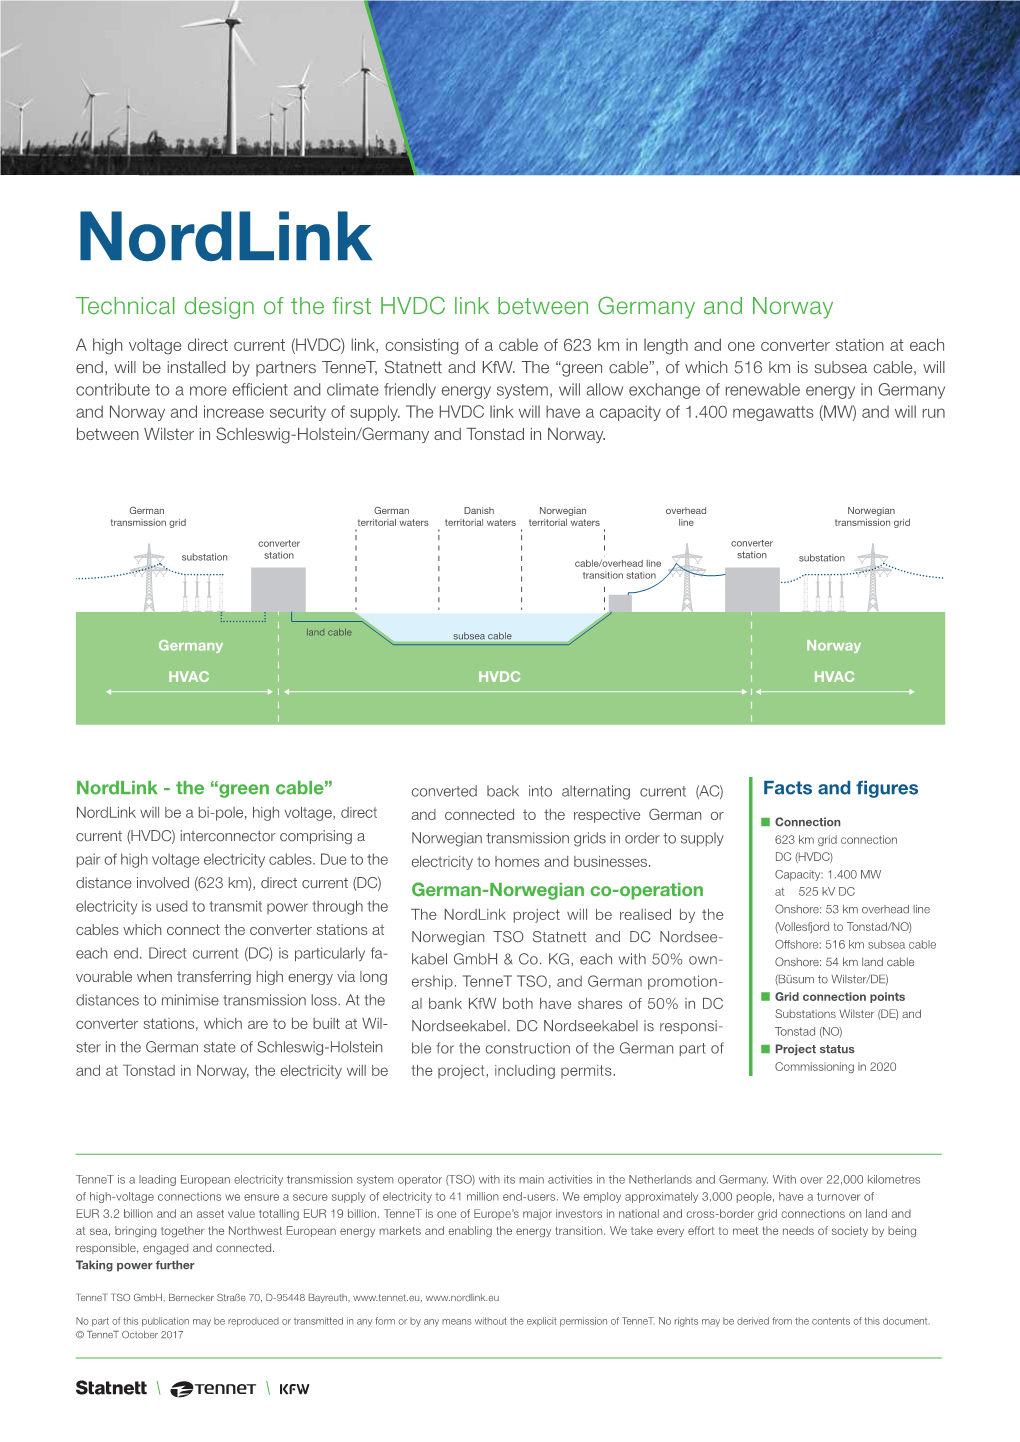 Nordlink Technical Design of the First HVDC Link Between Germany and Norway